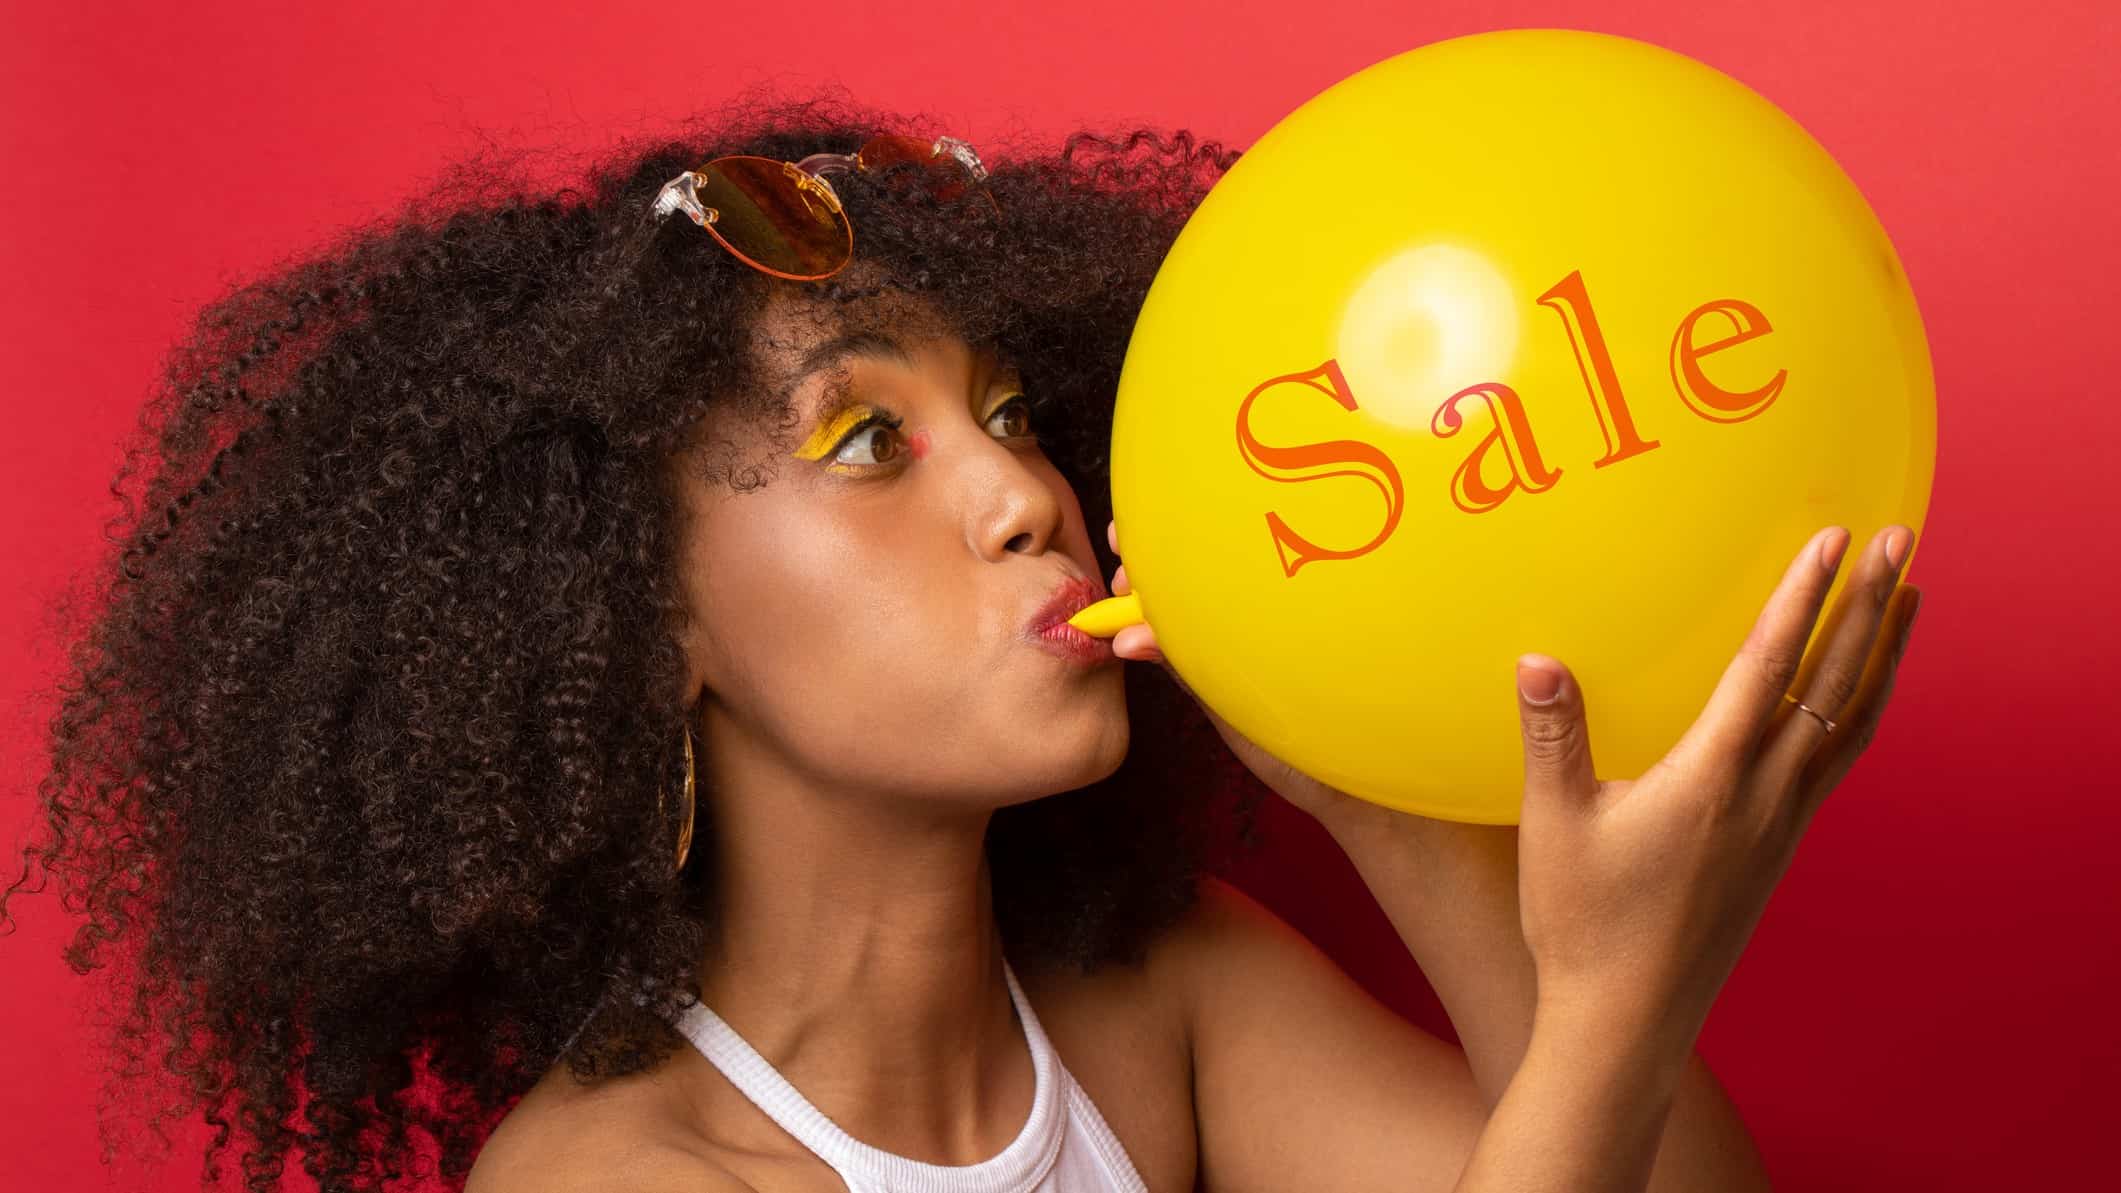 A woman inflates a balloon with the word 'sale' on it.